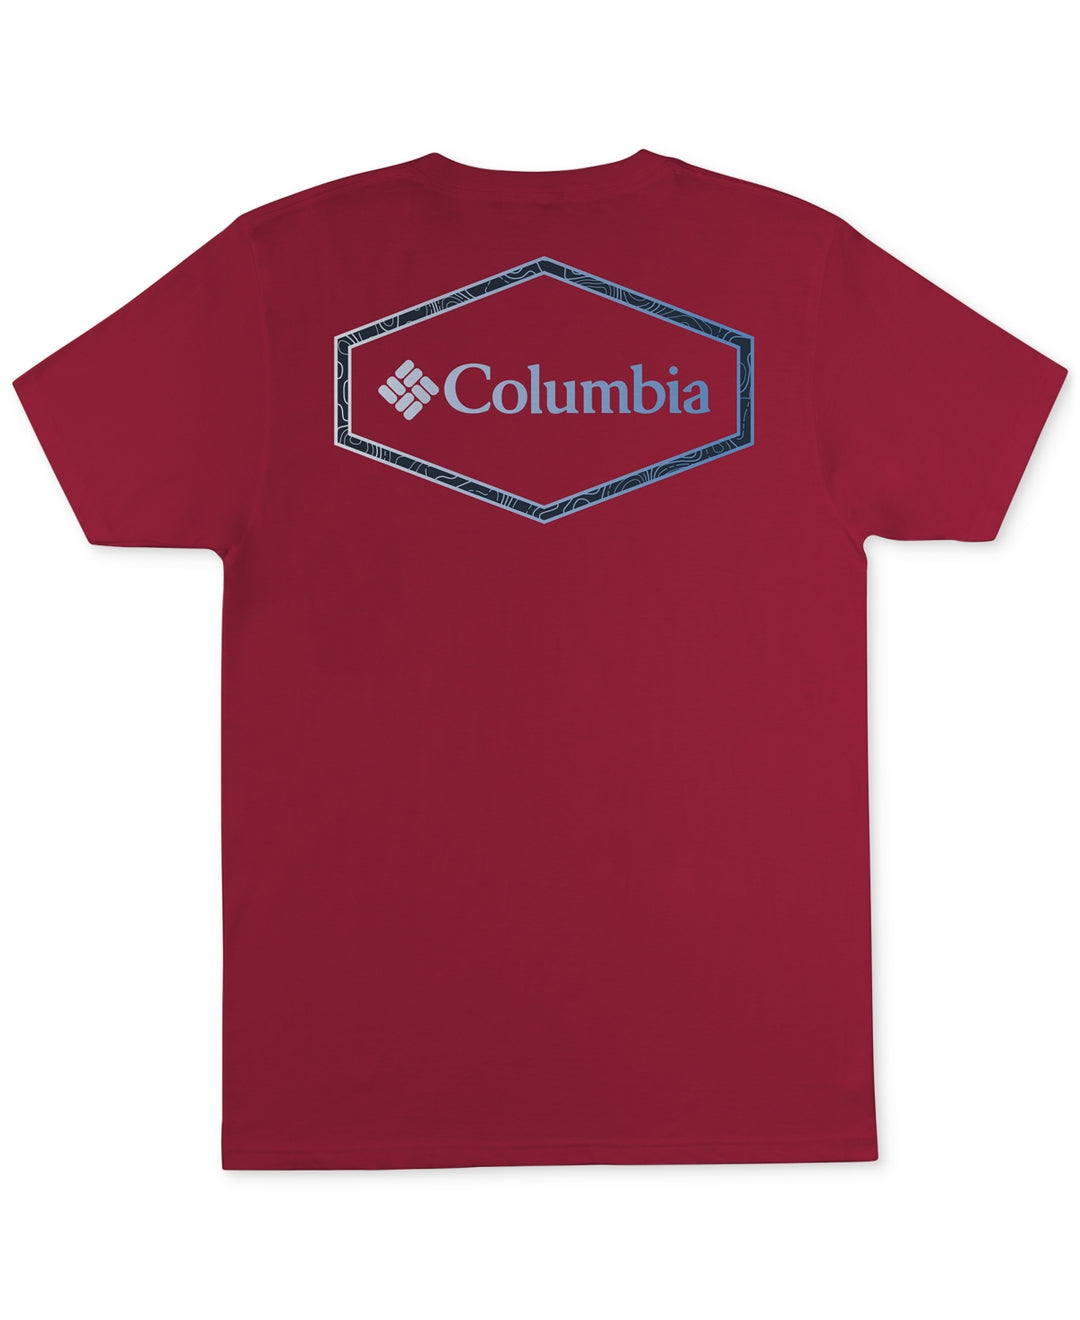 Columbia Men's Cotton Crewneck Graphic T-Shirt Red Size Small